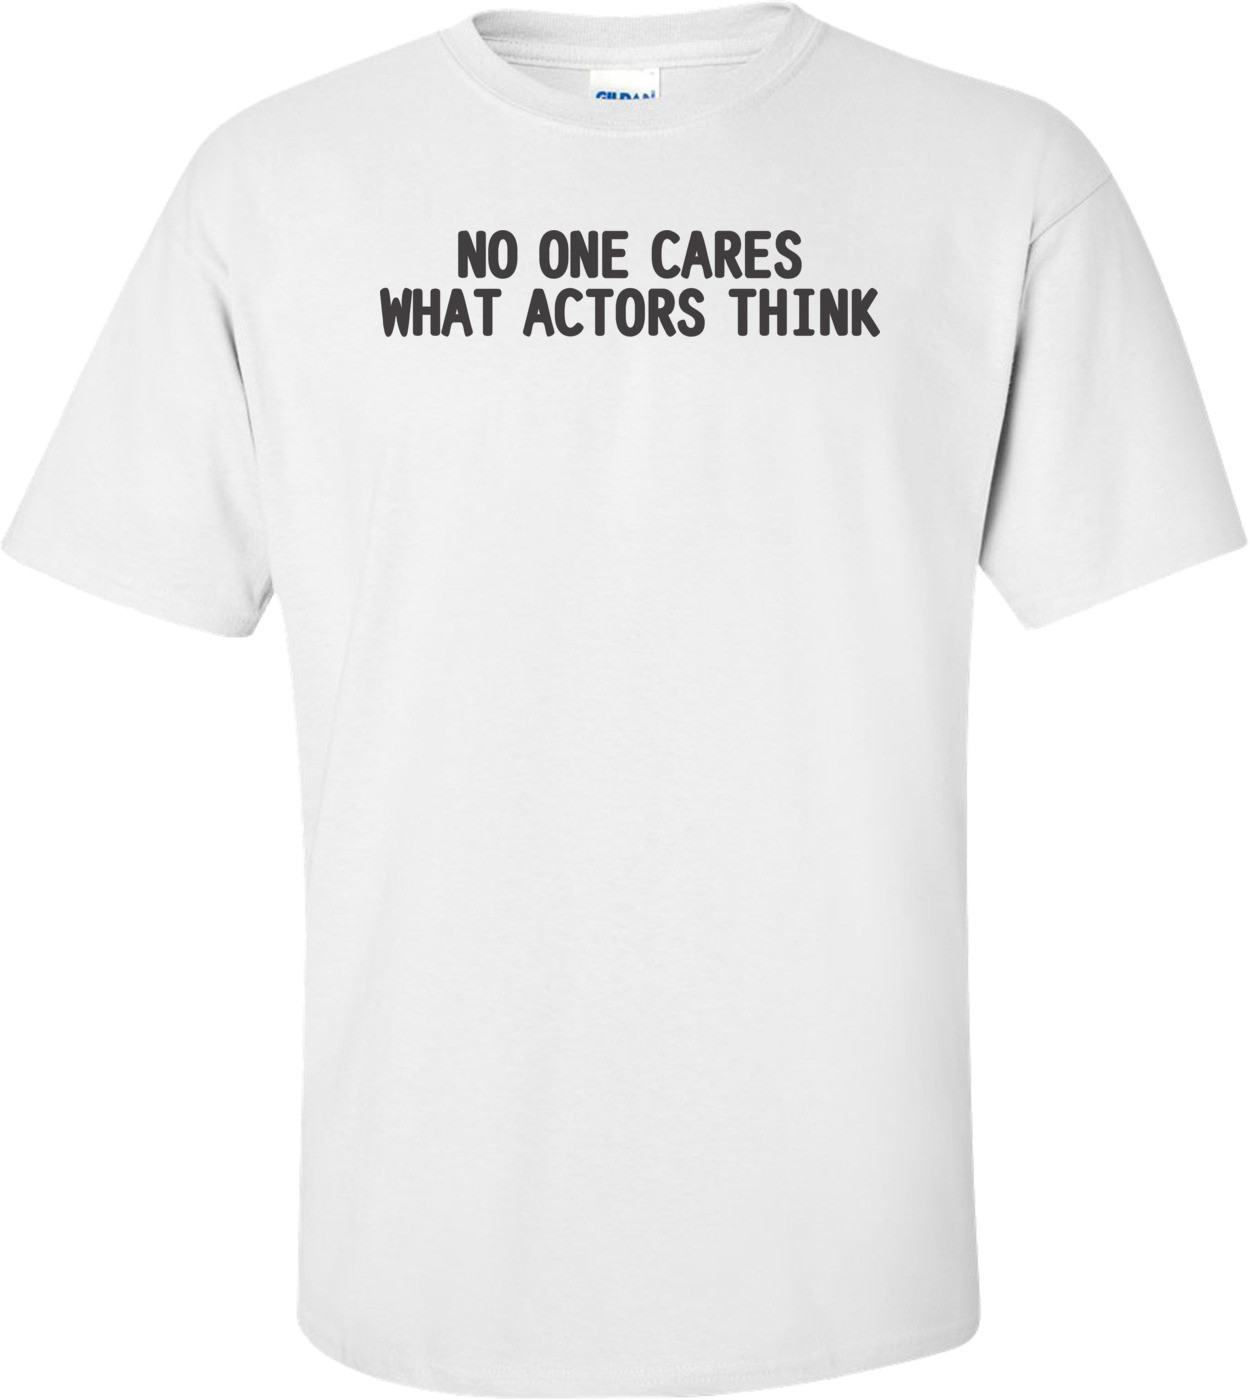 No One Cares What Actors Think